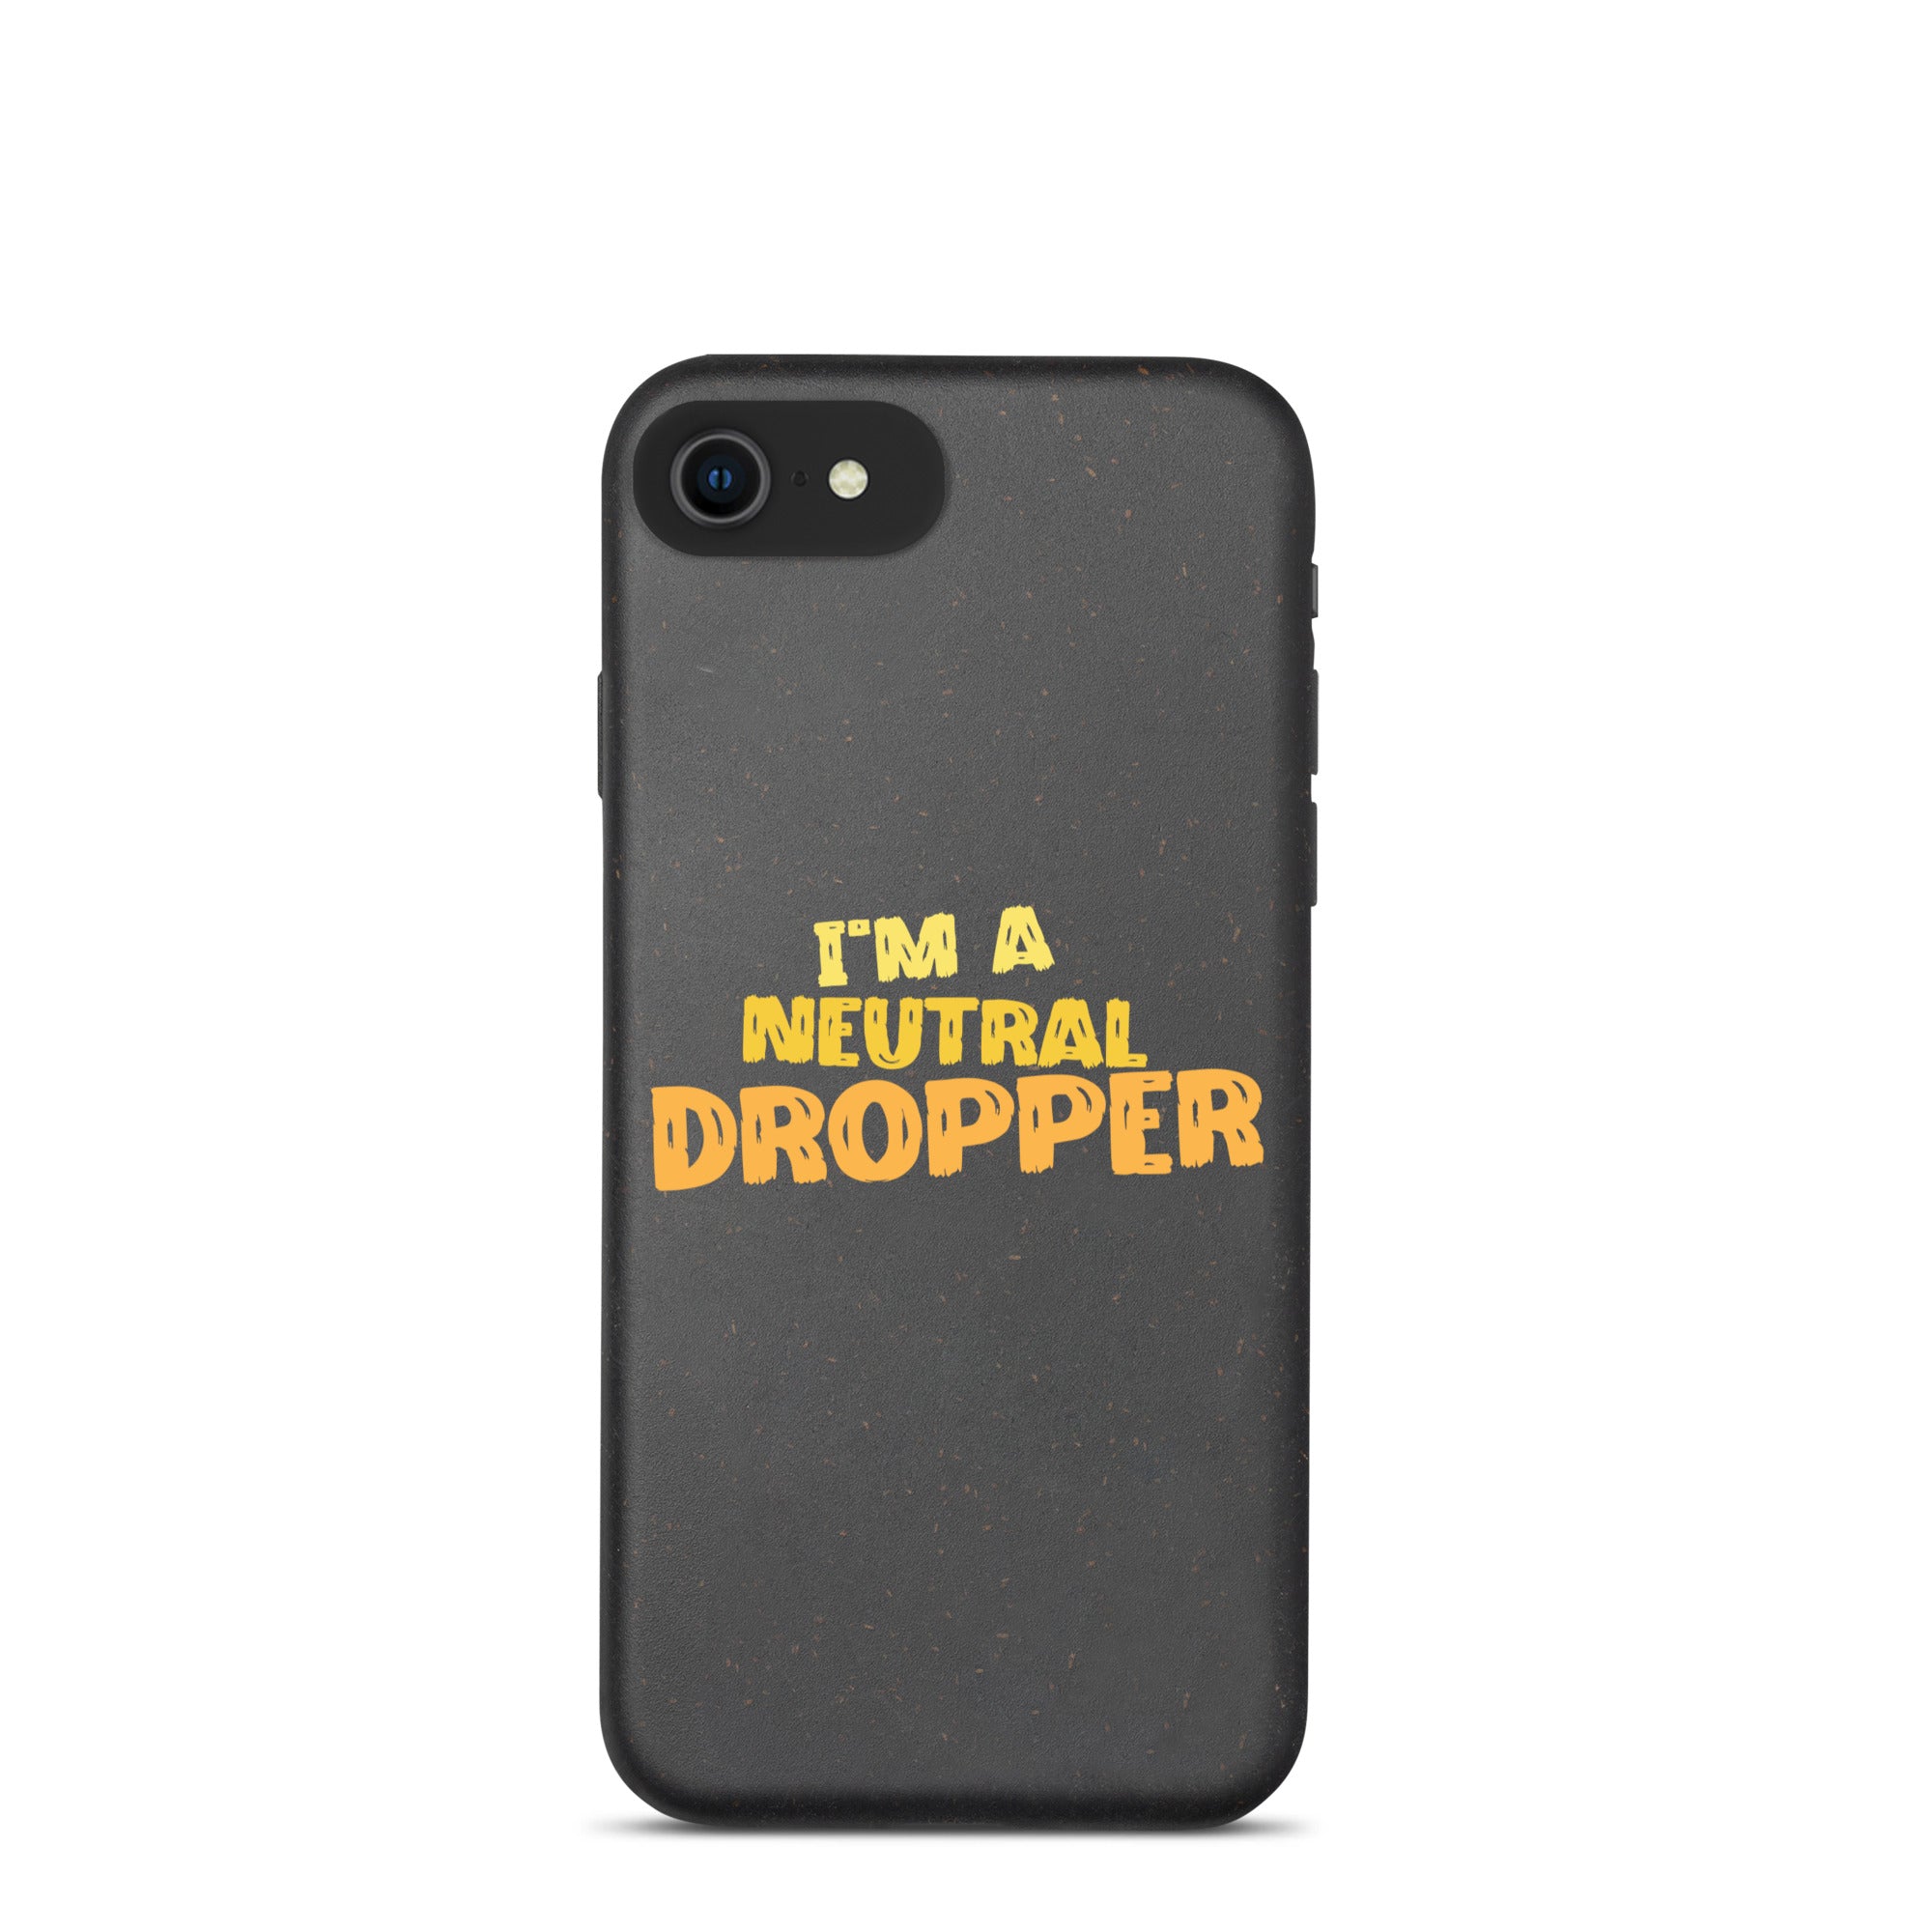 I'm a Neutral Dropper Speckled iPhone case